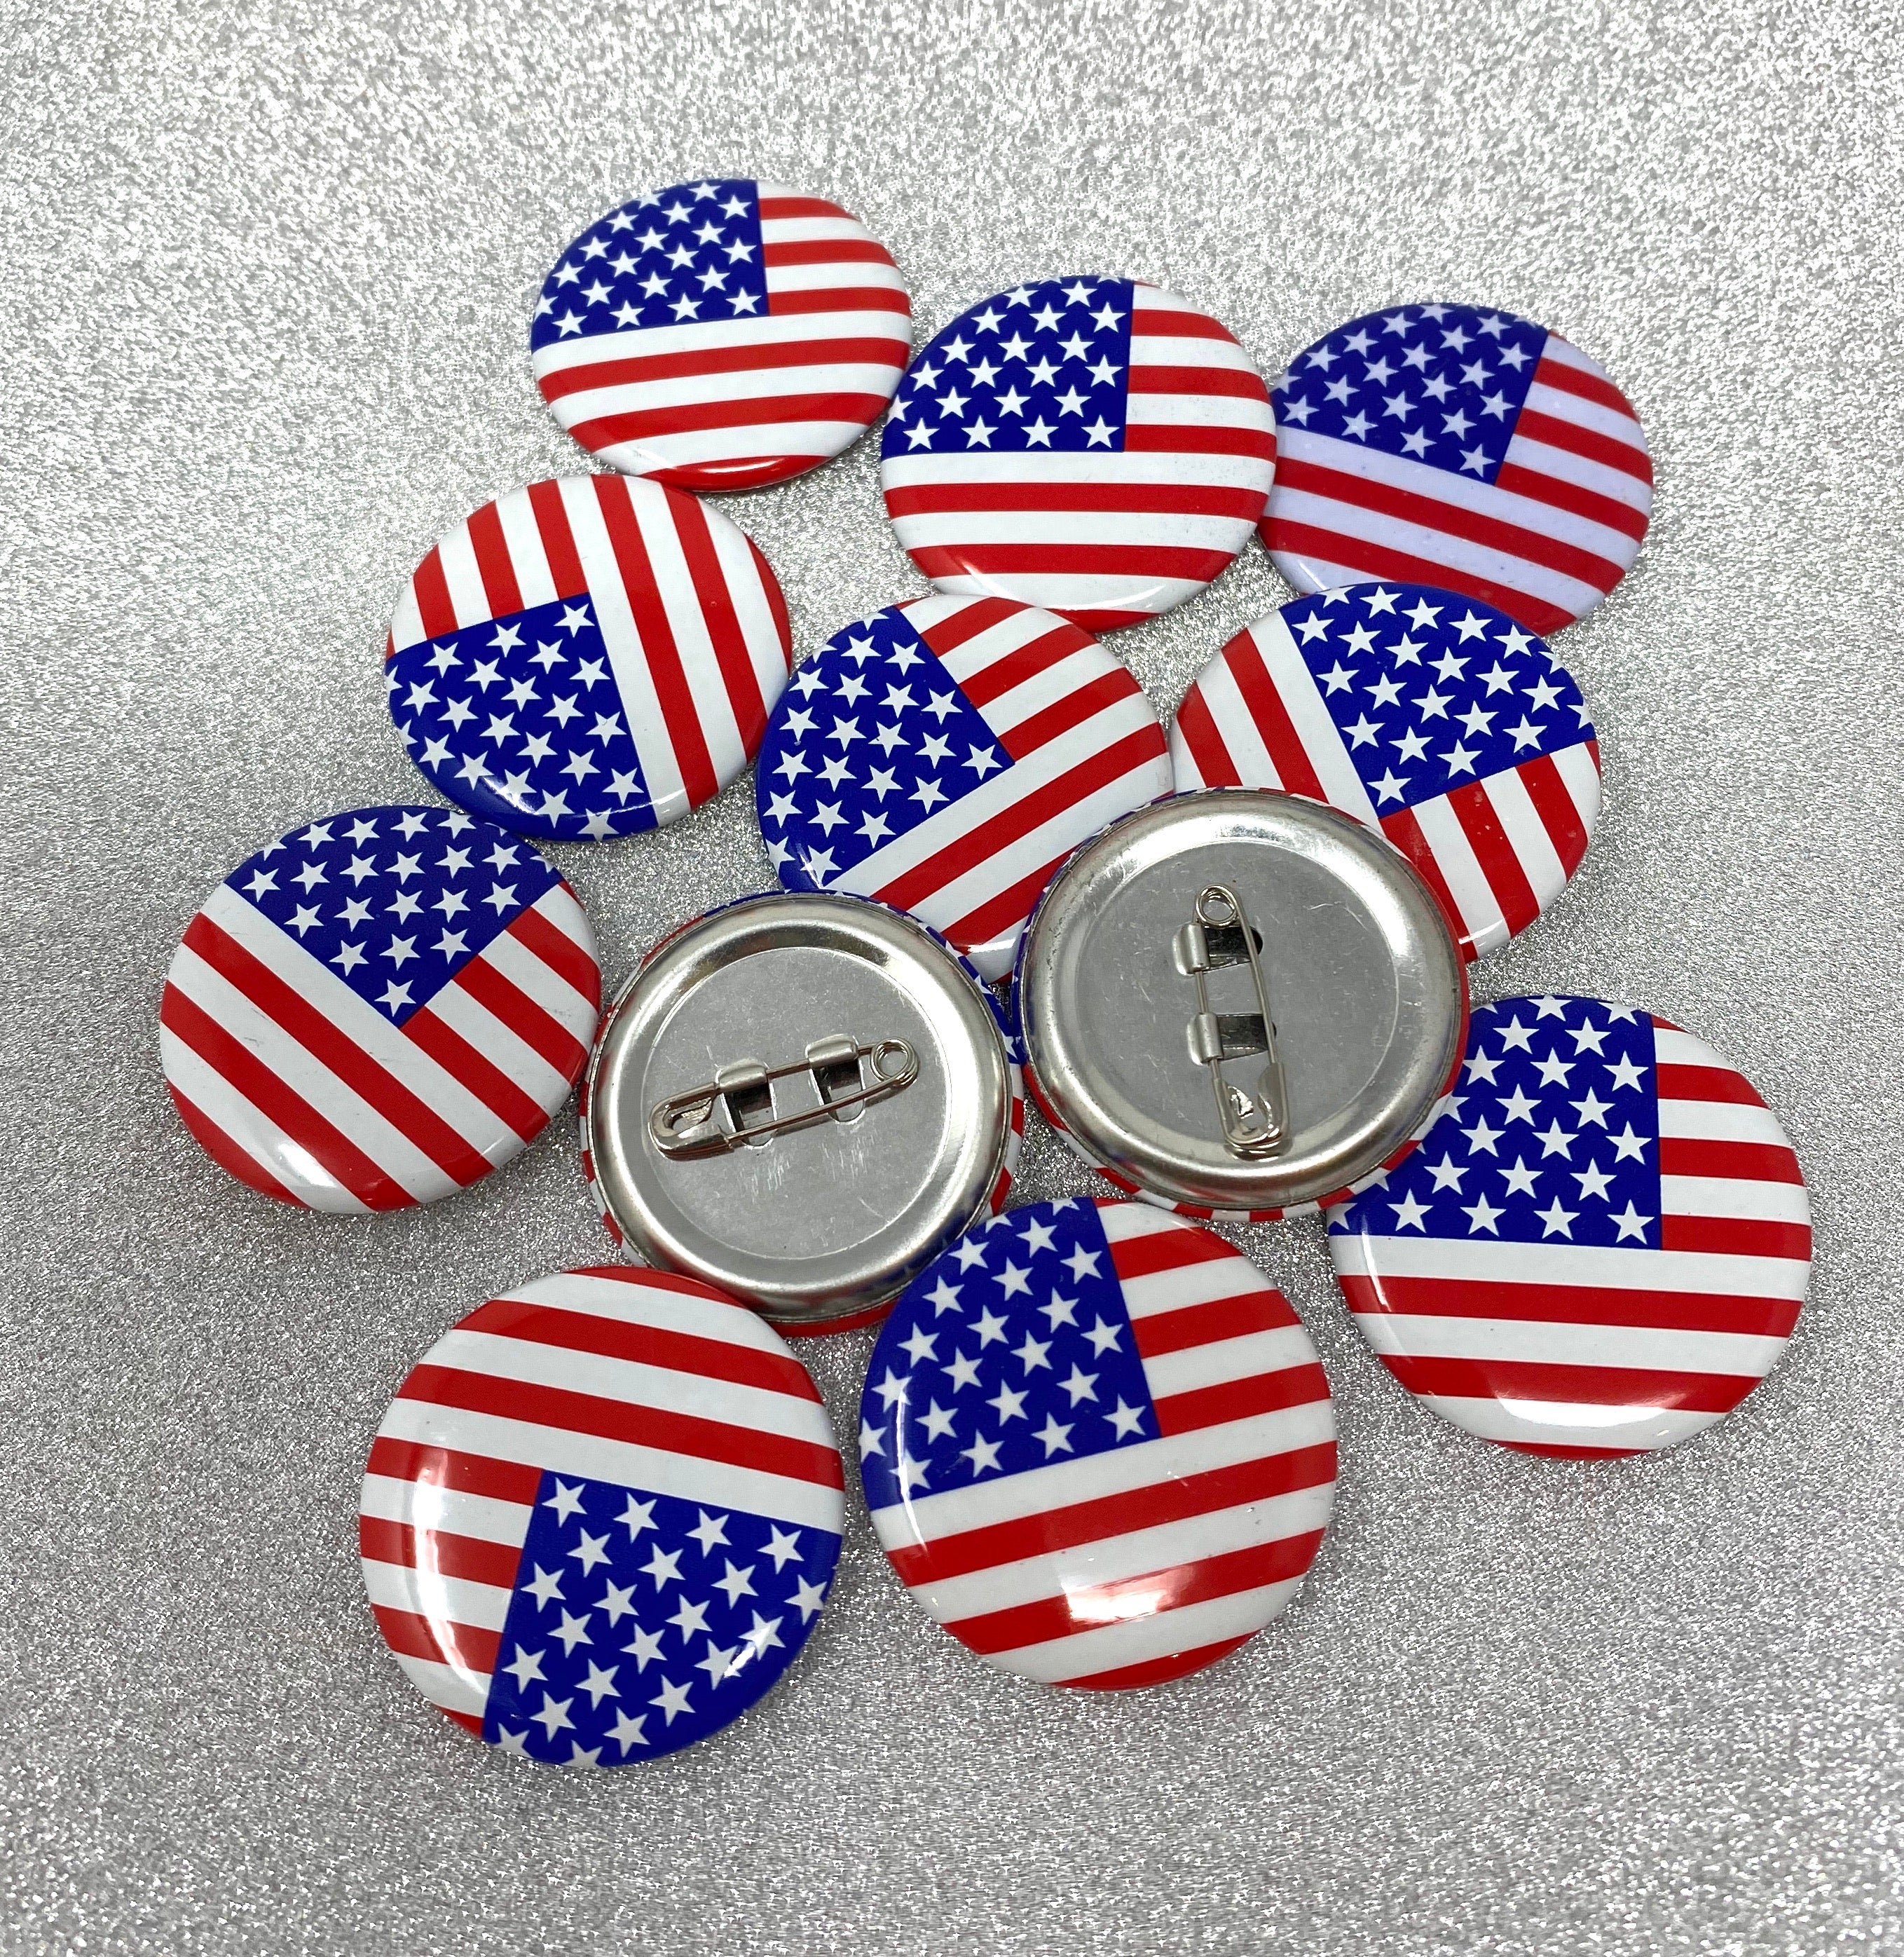 USA Flag Pins - Pin Back Buttons (Set of 12)